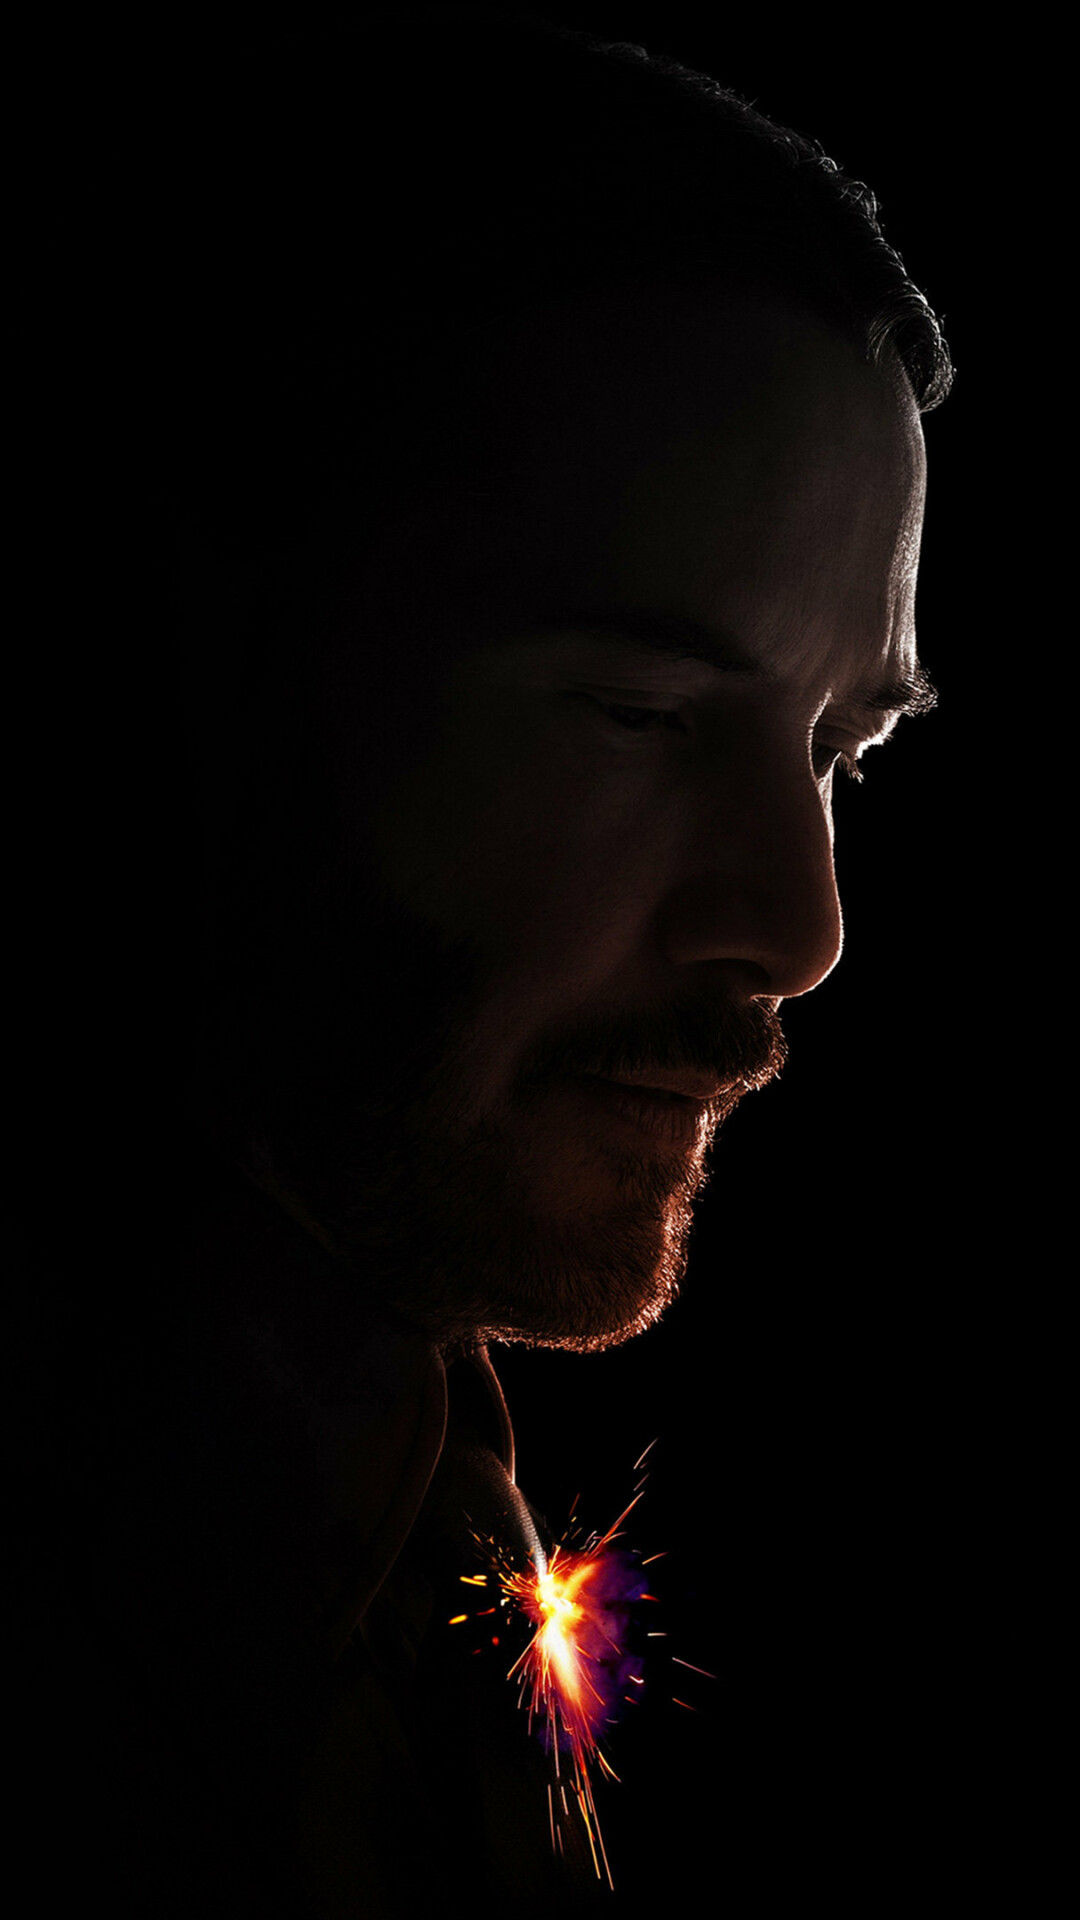 Keanu Reeves: One of the most recognizable film actors in the world, The John Wick franchise, Matrix movies. 1080x1920 Full HD Wallpaper.